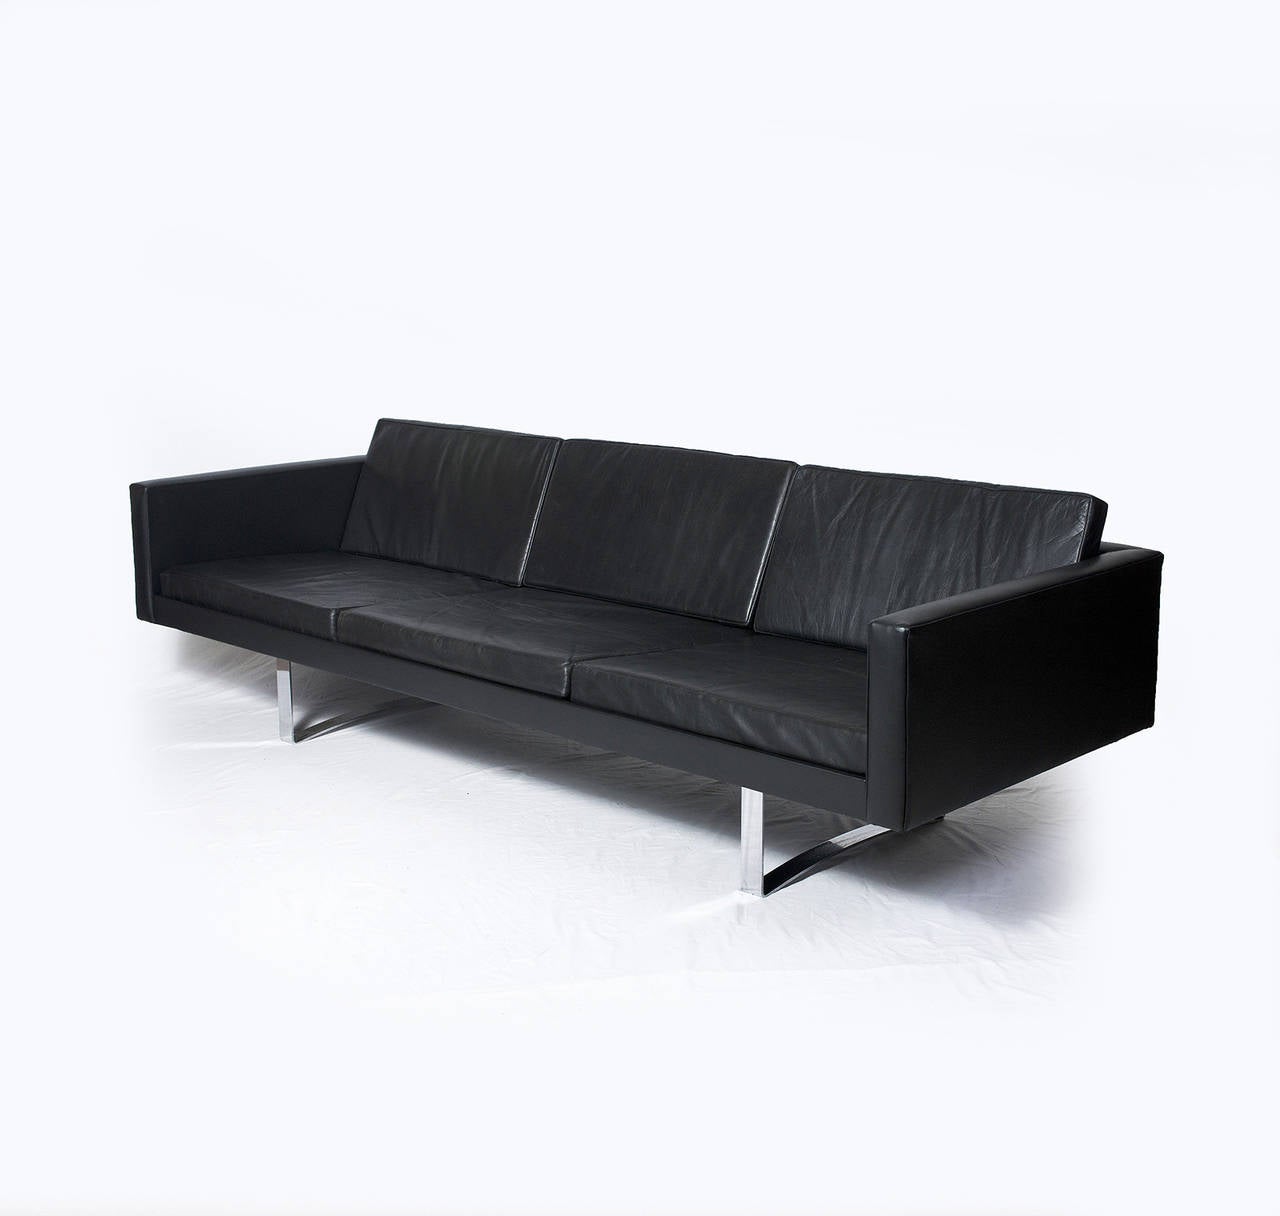 Bodil Kjaer leather sofa designed in 1959 and produced by Hovedstadens Mobelfabrik.  Store formerly known as ARTFUL DODGER INC